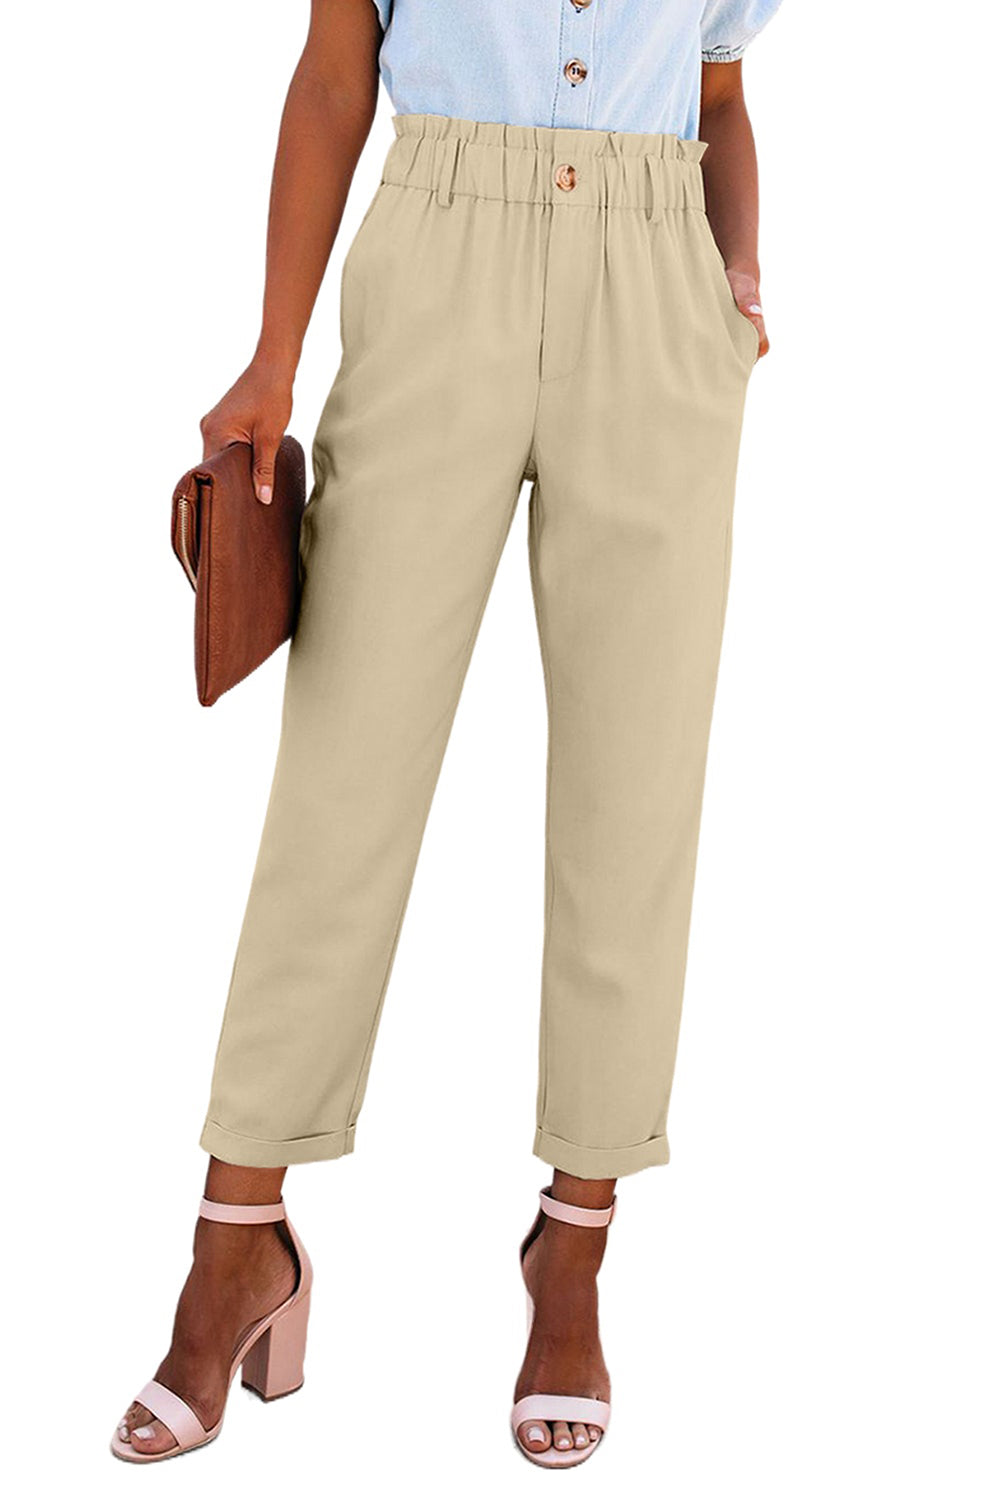 Beige Casual Frill Paper Bag Pocket High Rise Pants